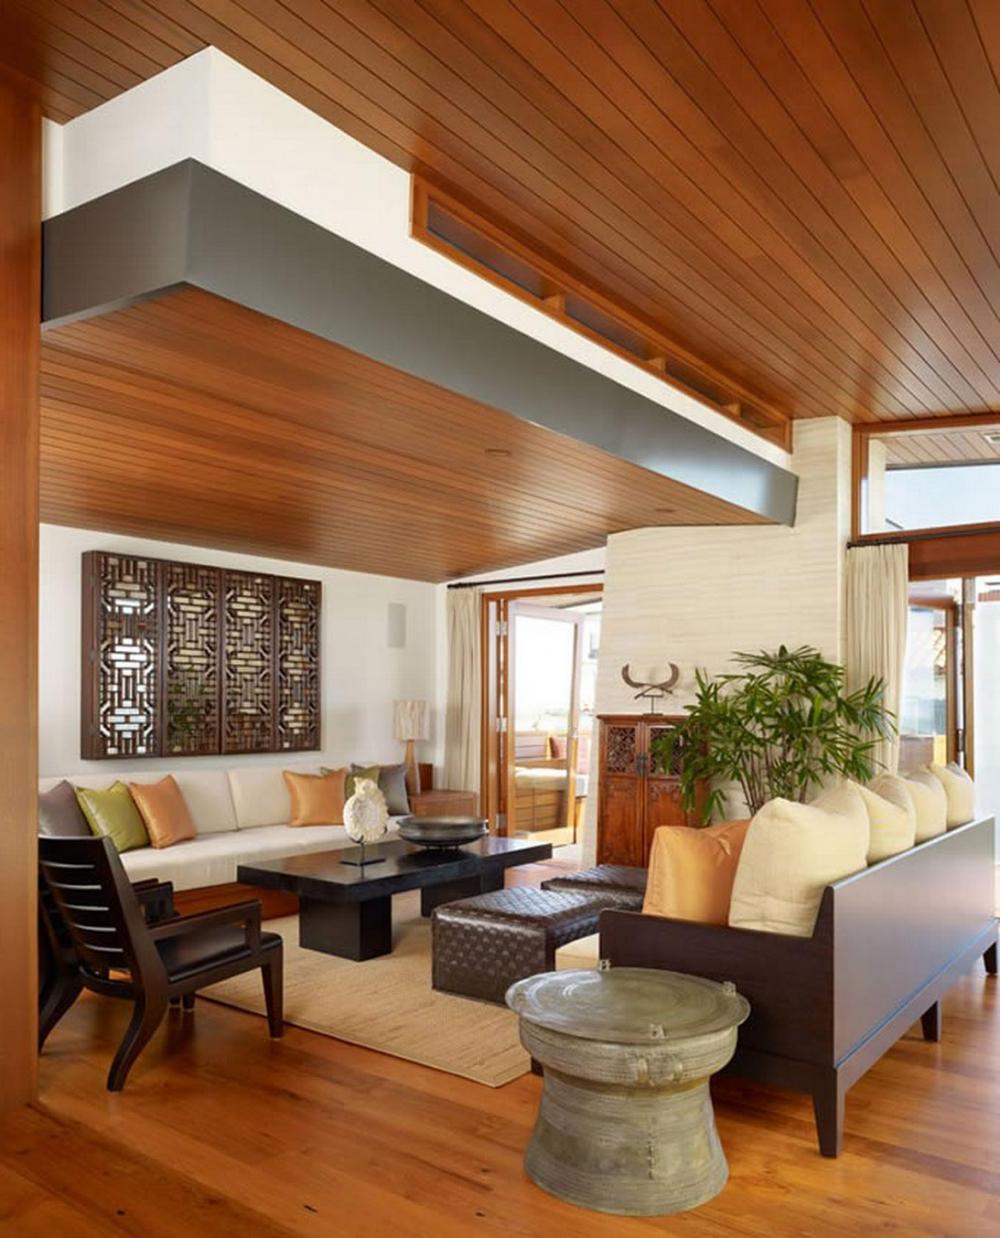 The All Wooden Spectacle2 Best 7 Ceilings Design Ideas - 7